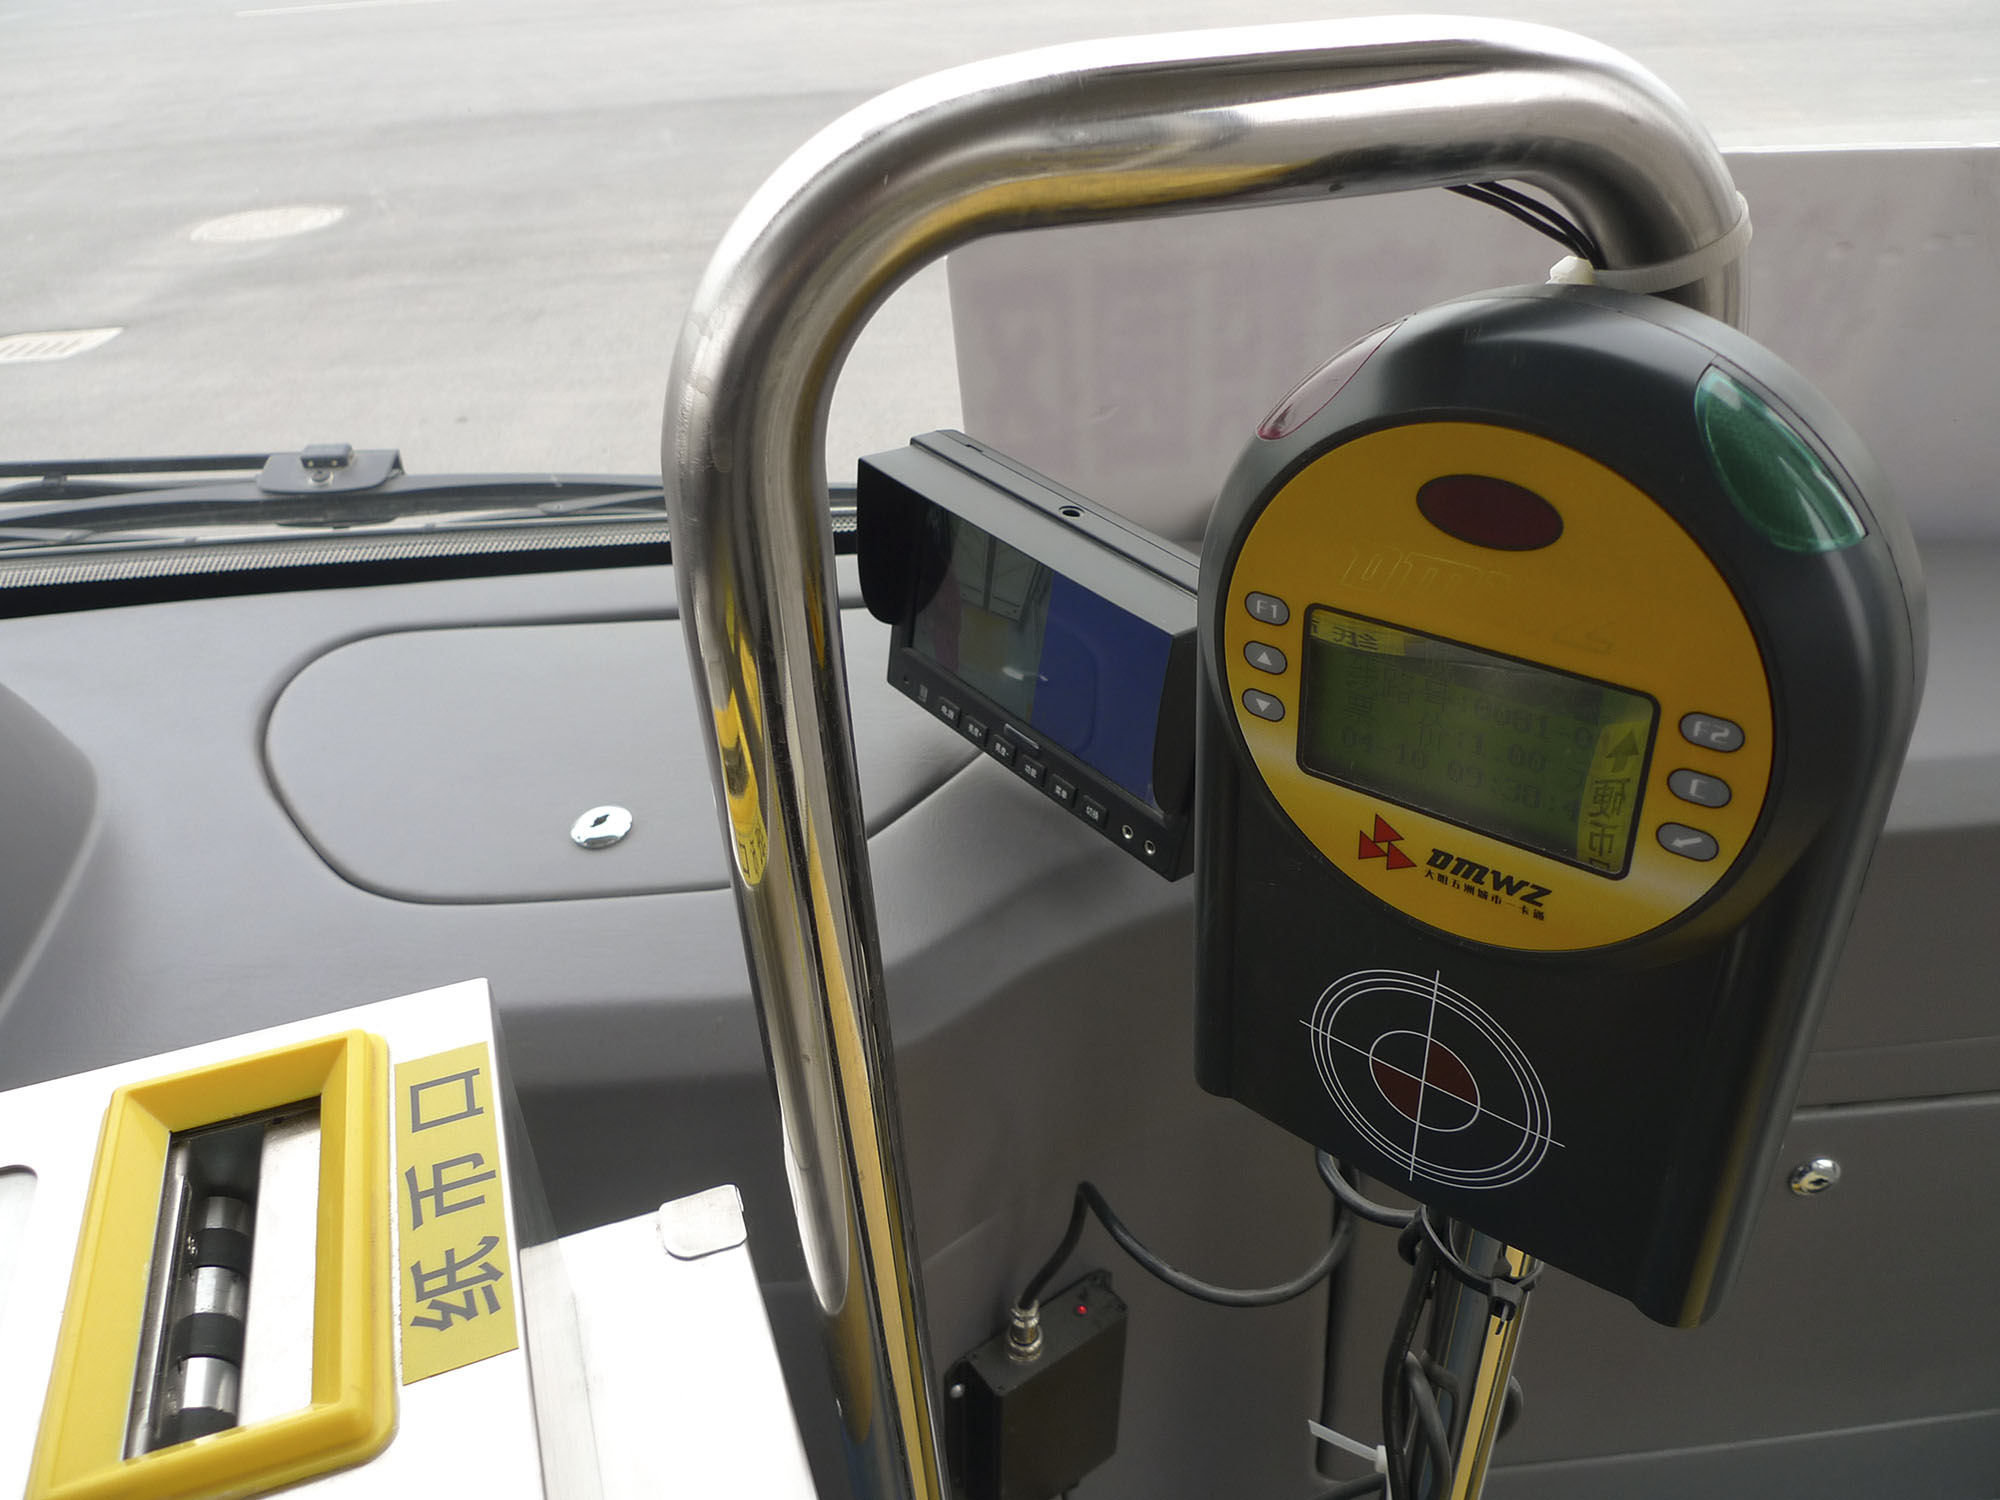 Fig. 18.2 Onboard fare collection on a feeder bus in Yancheng, China, allows customers to connect to the BRT using a smart card payment system.